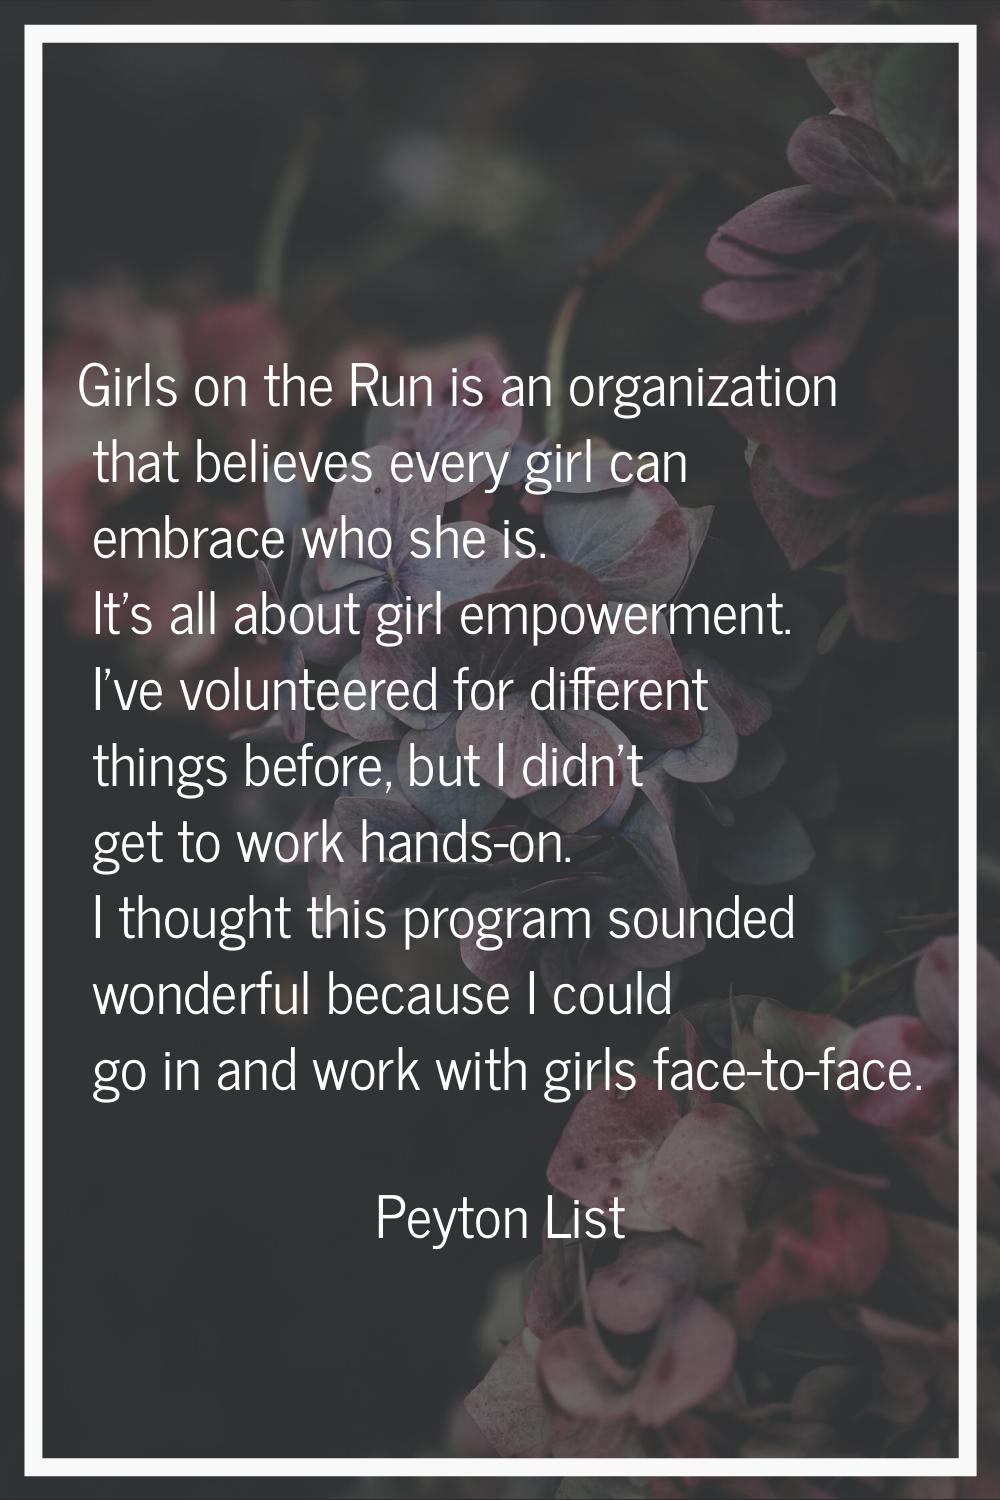 Girls on the Run is an organization that believes every girl can embrace who she is. It's all about